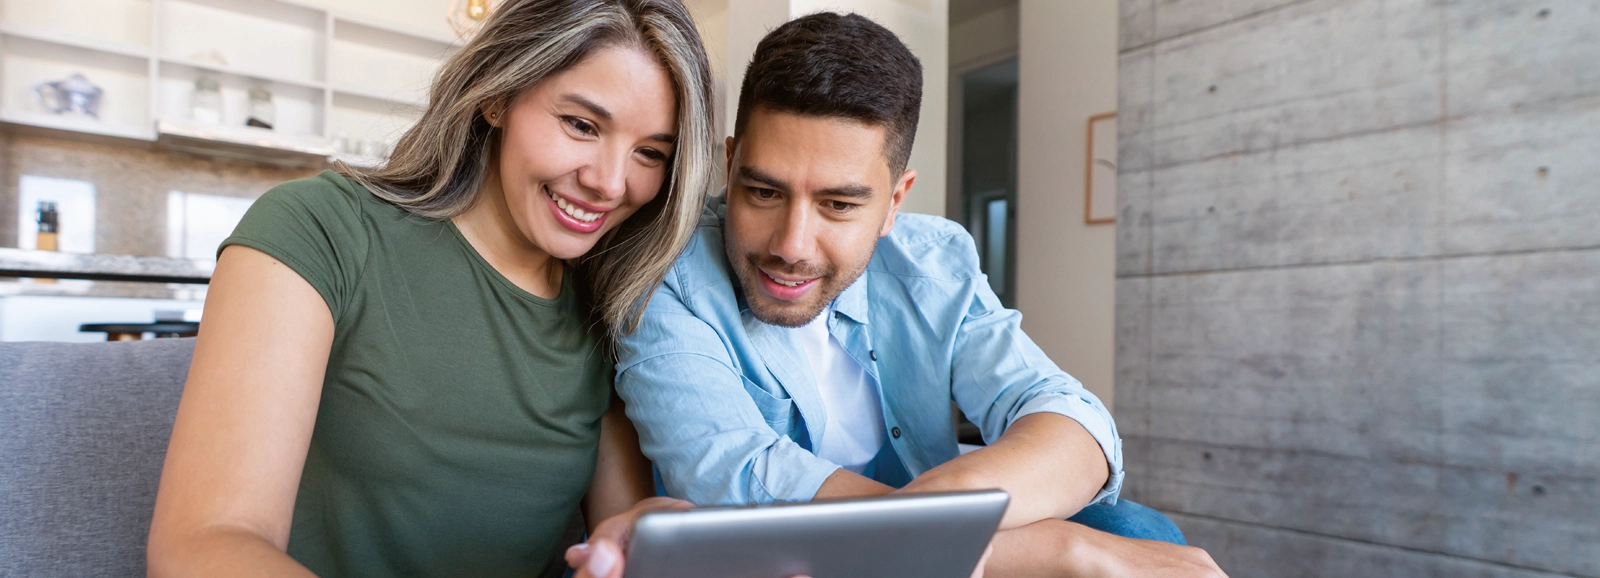 couple-looking-at-tablet-1600x5781.webp